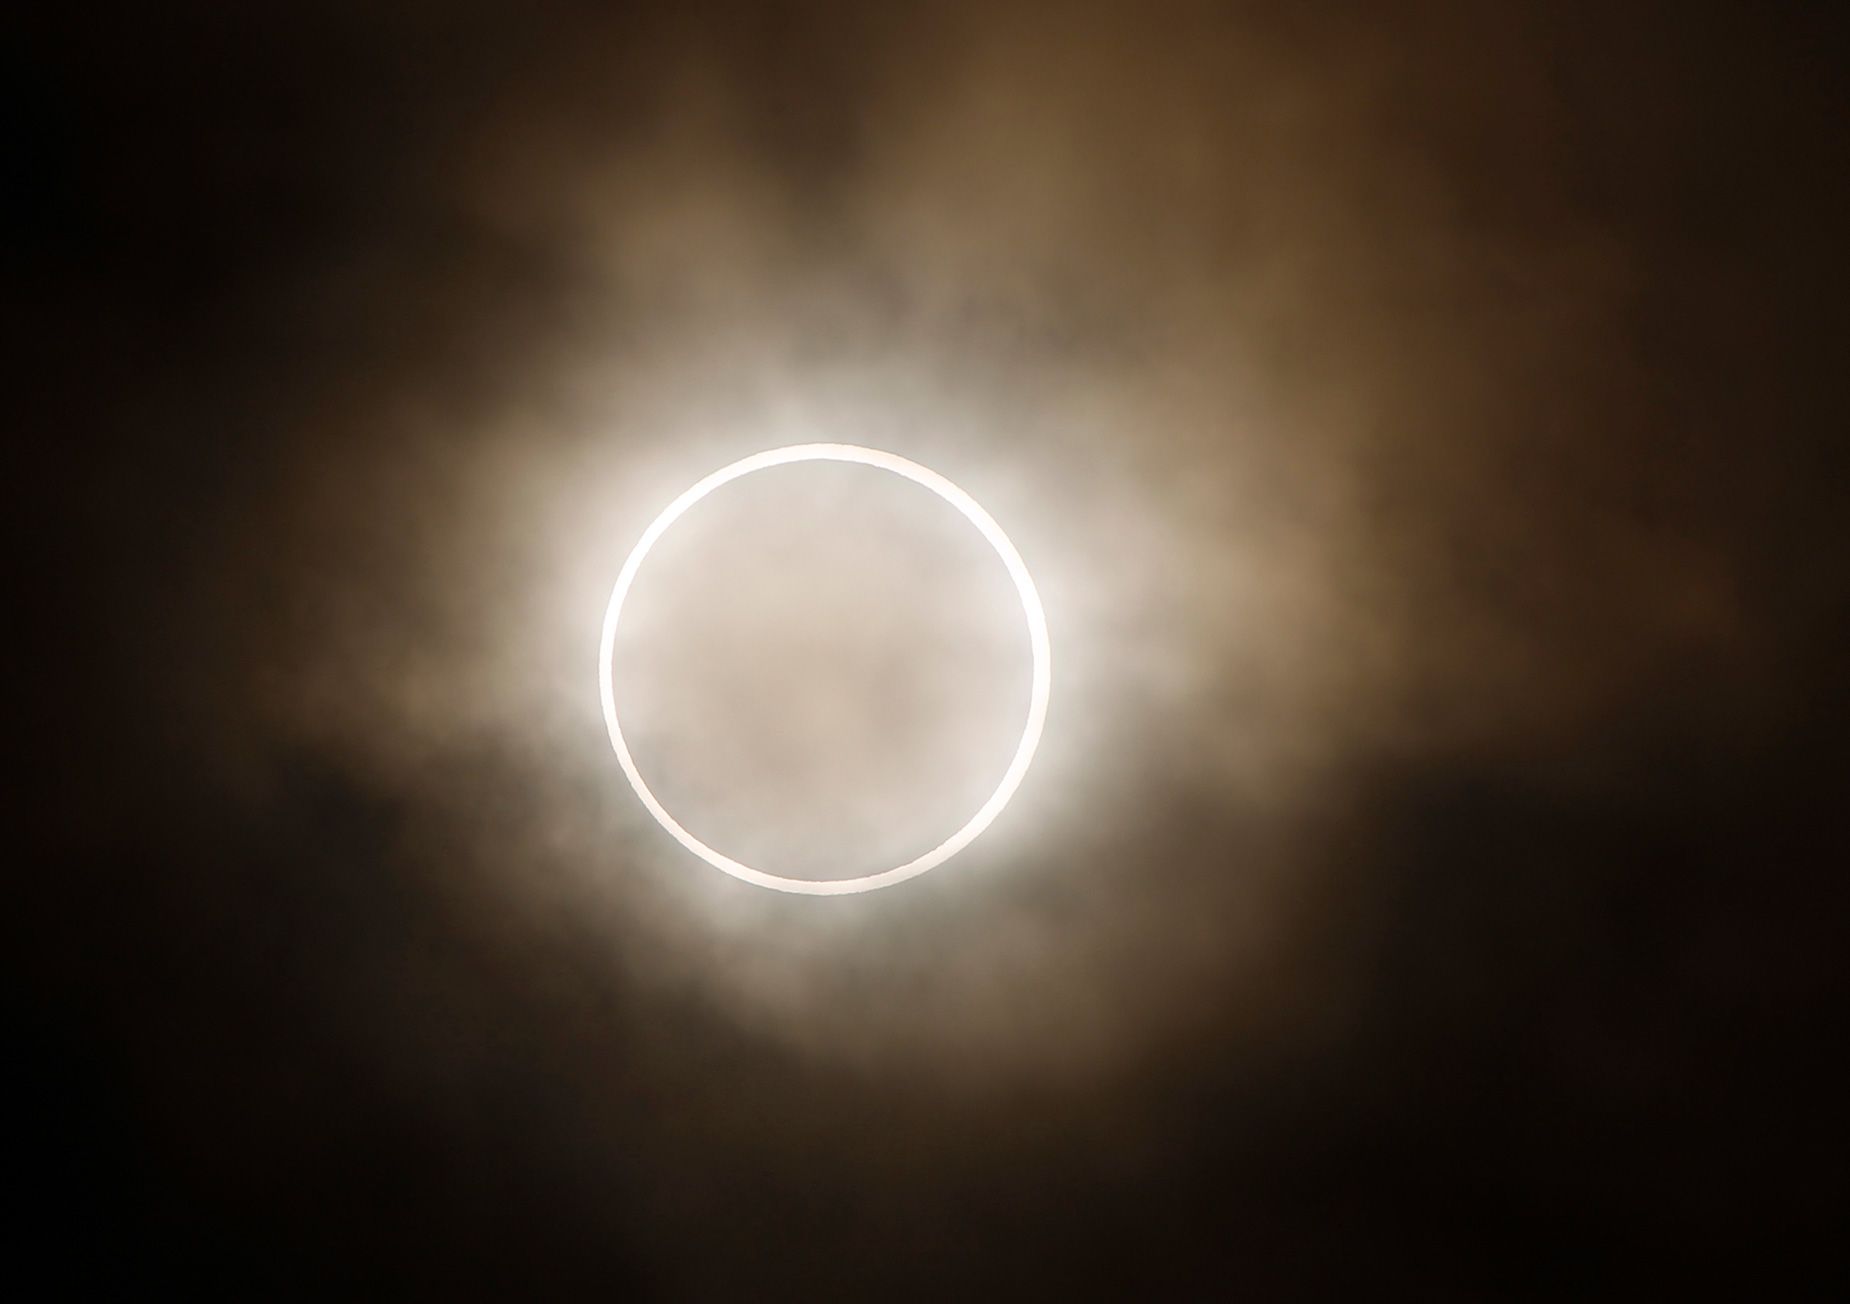 A 'Ring of Fire' solar eclipse is coming soon. Here's what you